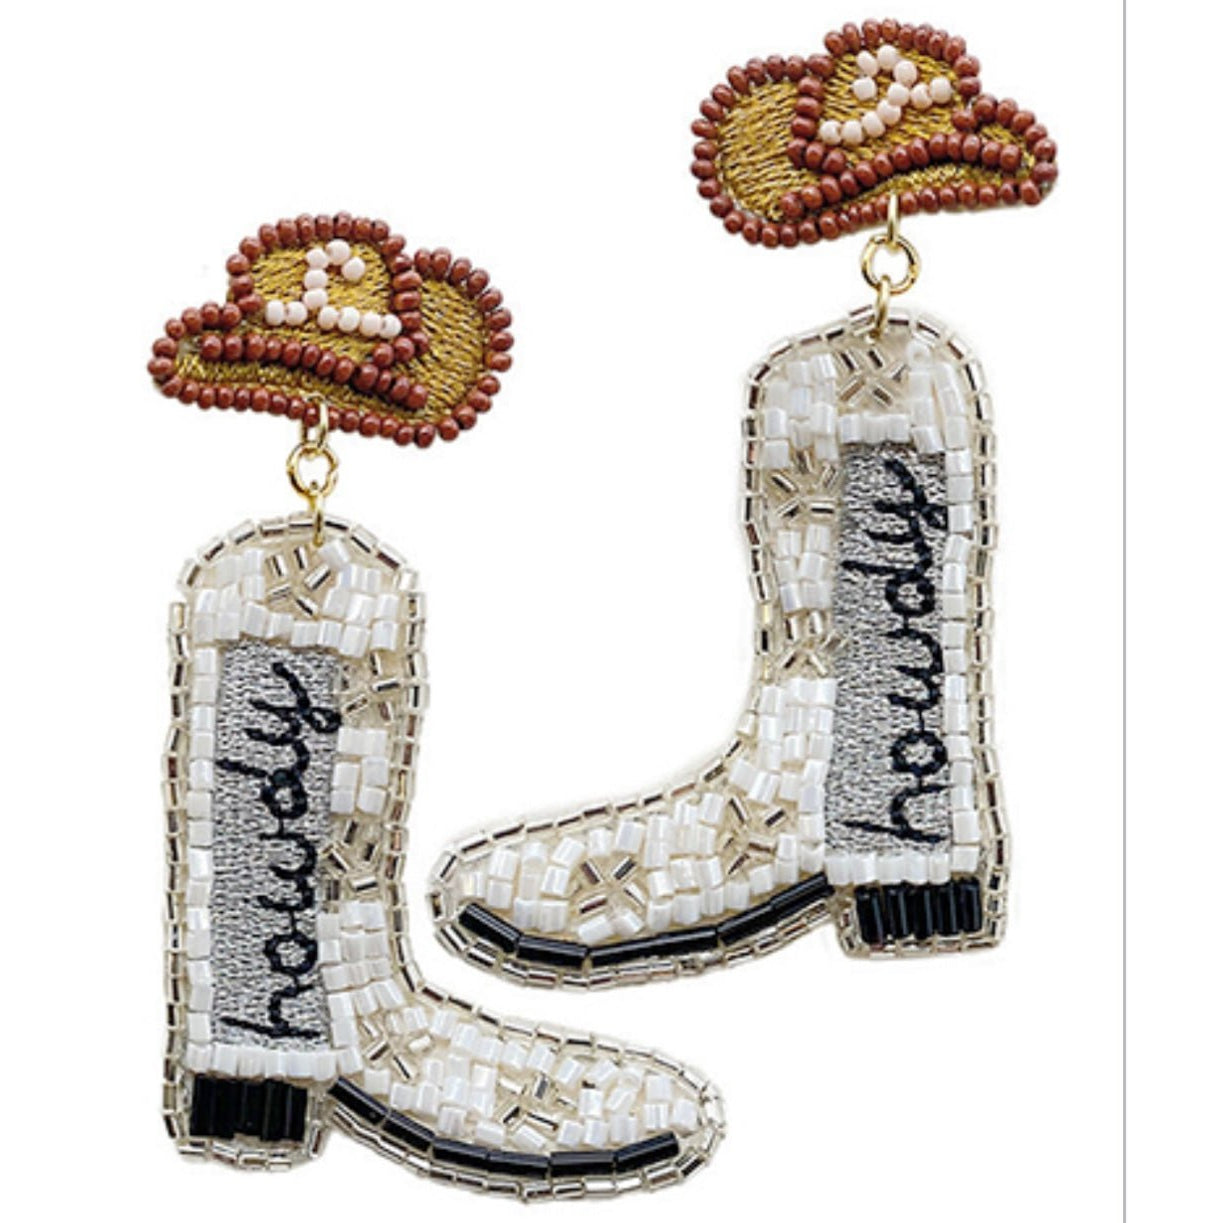 Howdy Beaded Boots Earrings - Available in 2 Colors